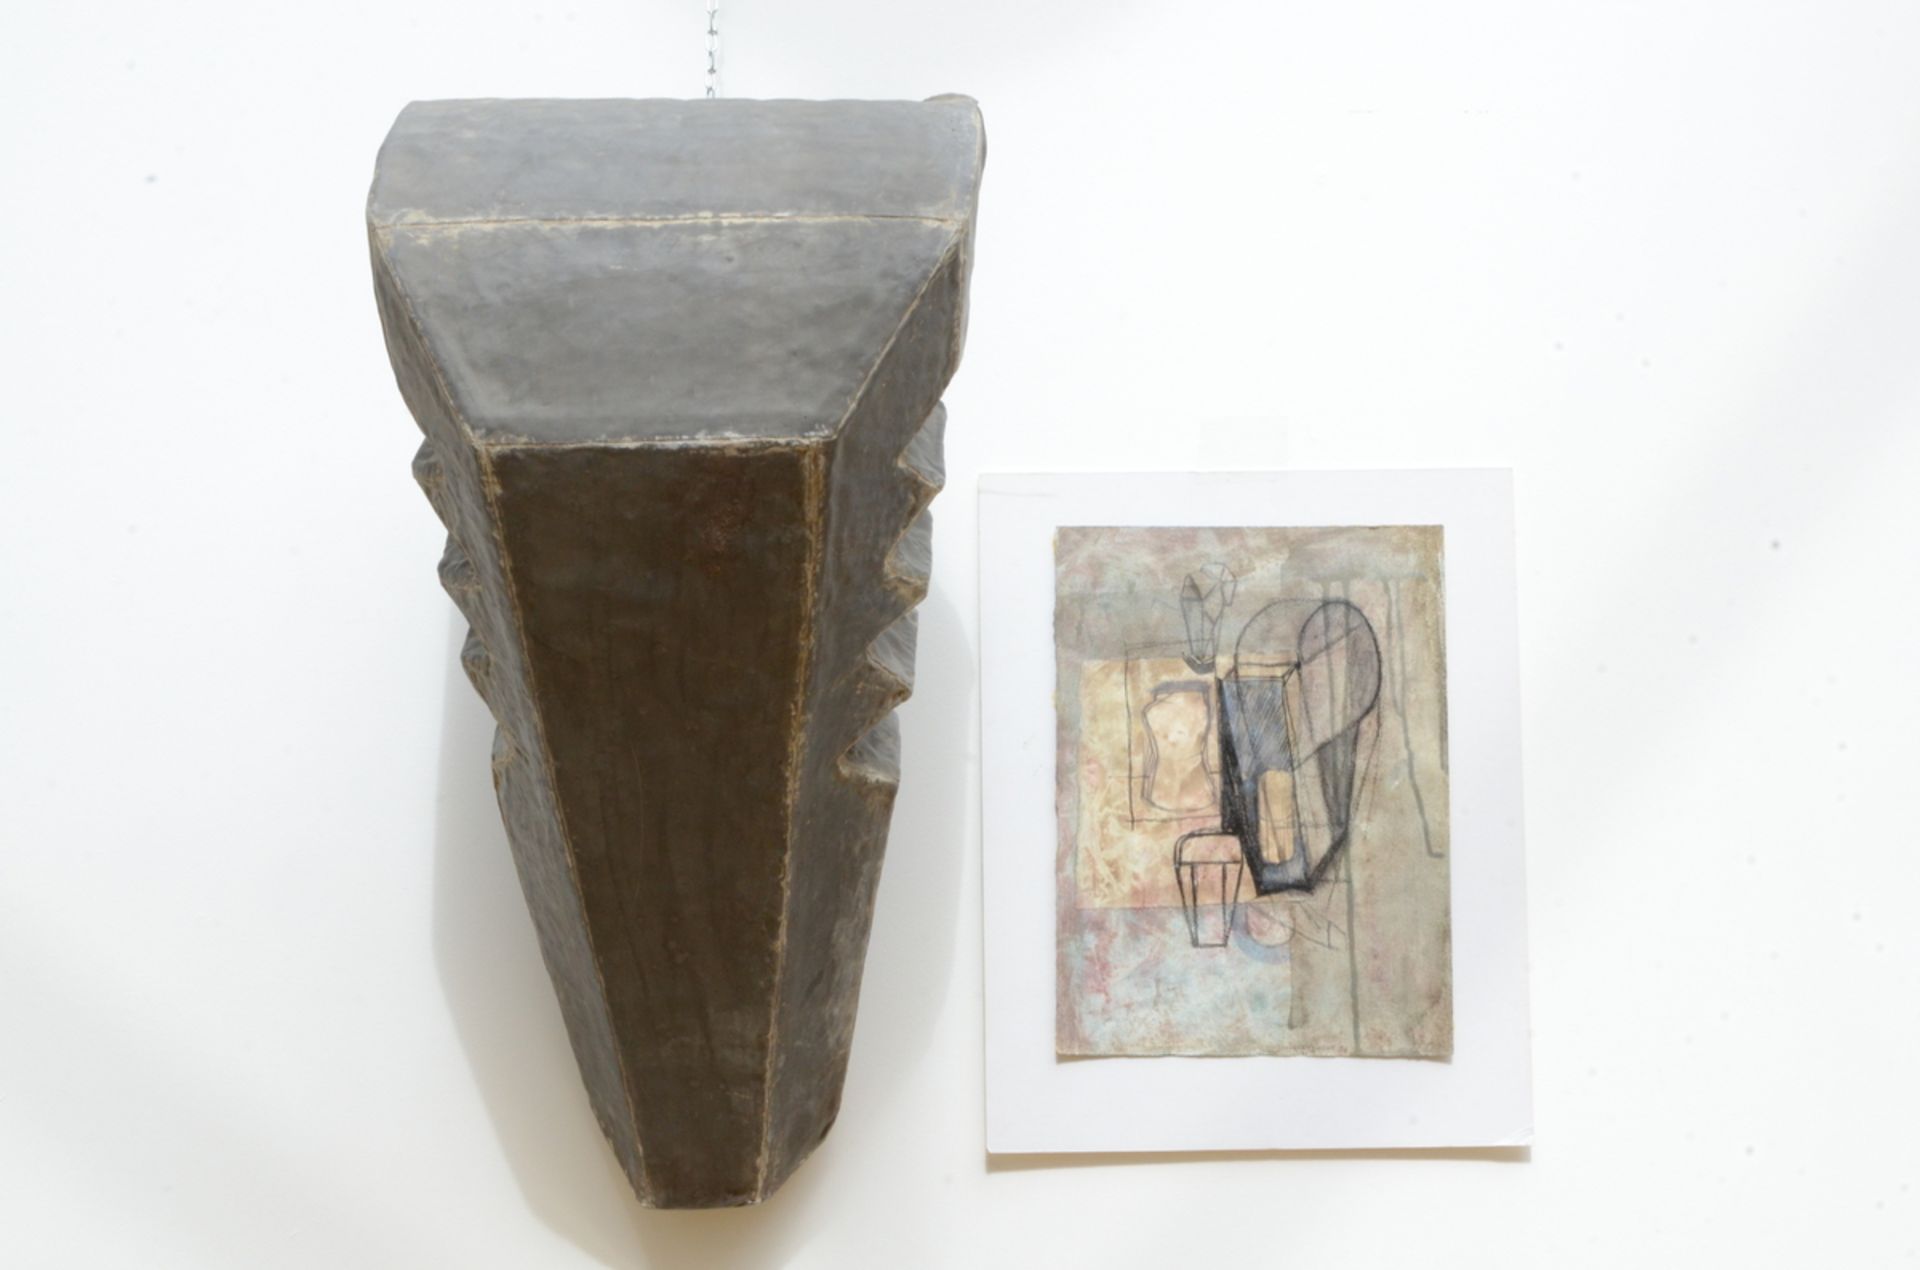 Jeroen Daled: sculpture 'protector 1990' lead on polyester (80x40x38cm) and drawing (28x38cm)